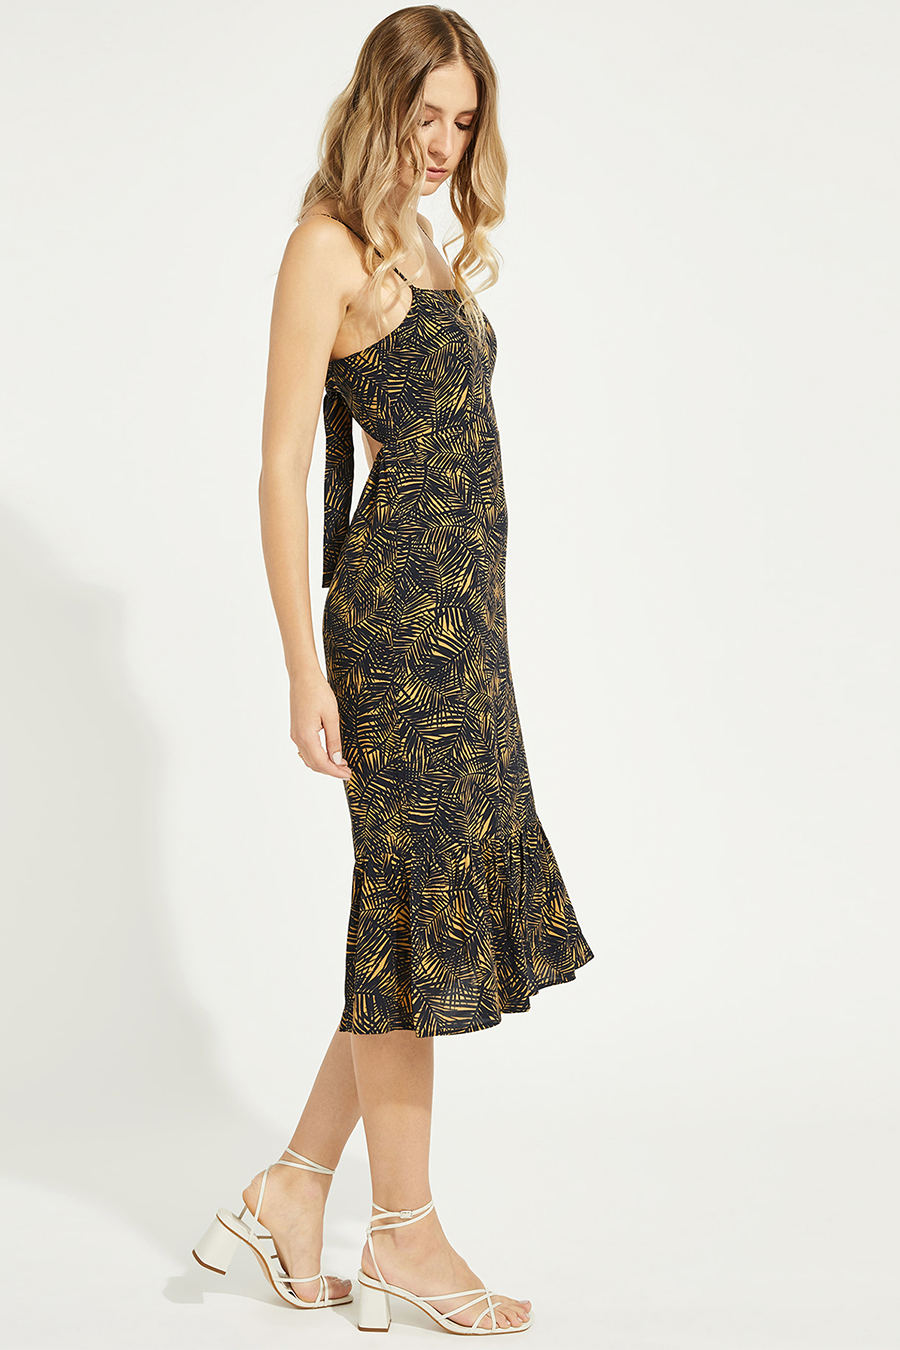 Ambrosia Dress | Gold Palm - Main Image Number 2 of 3